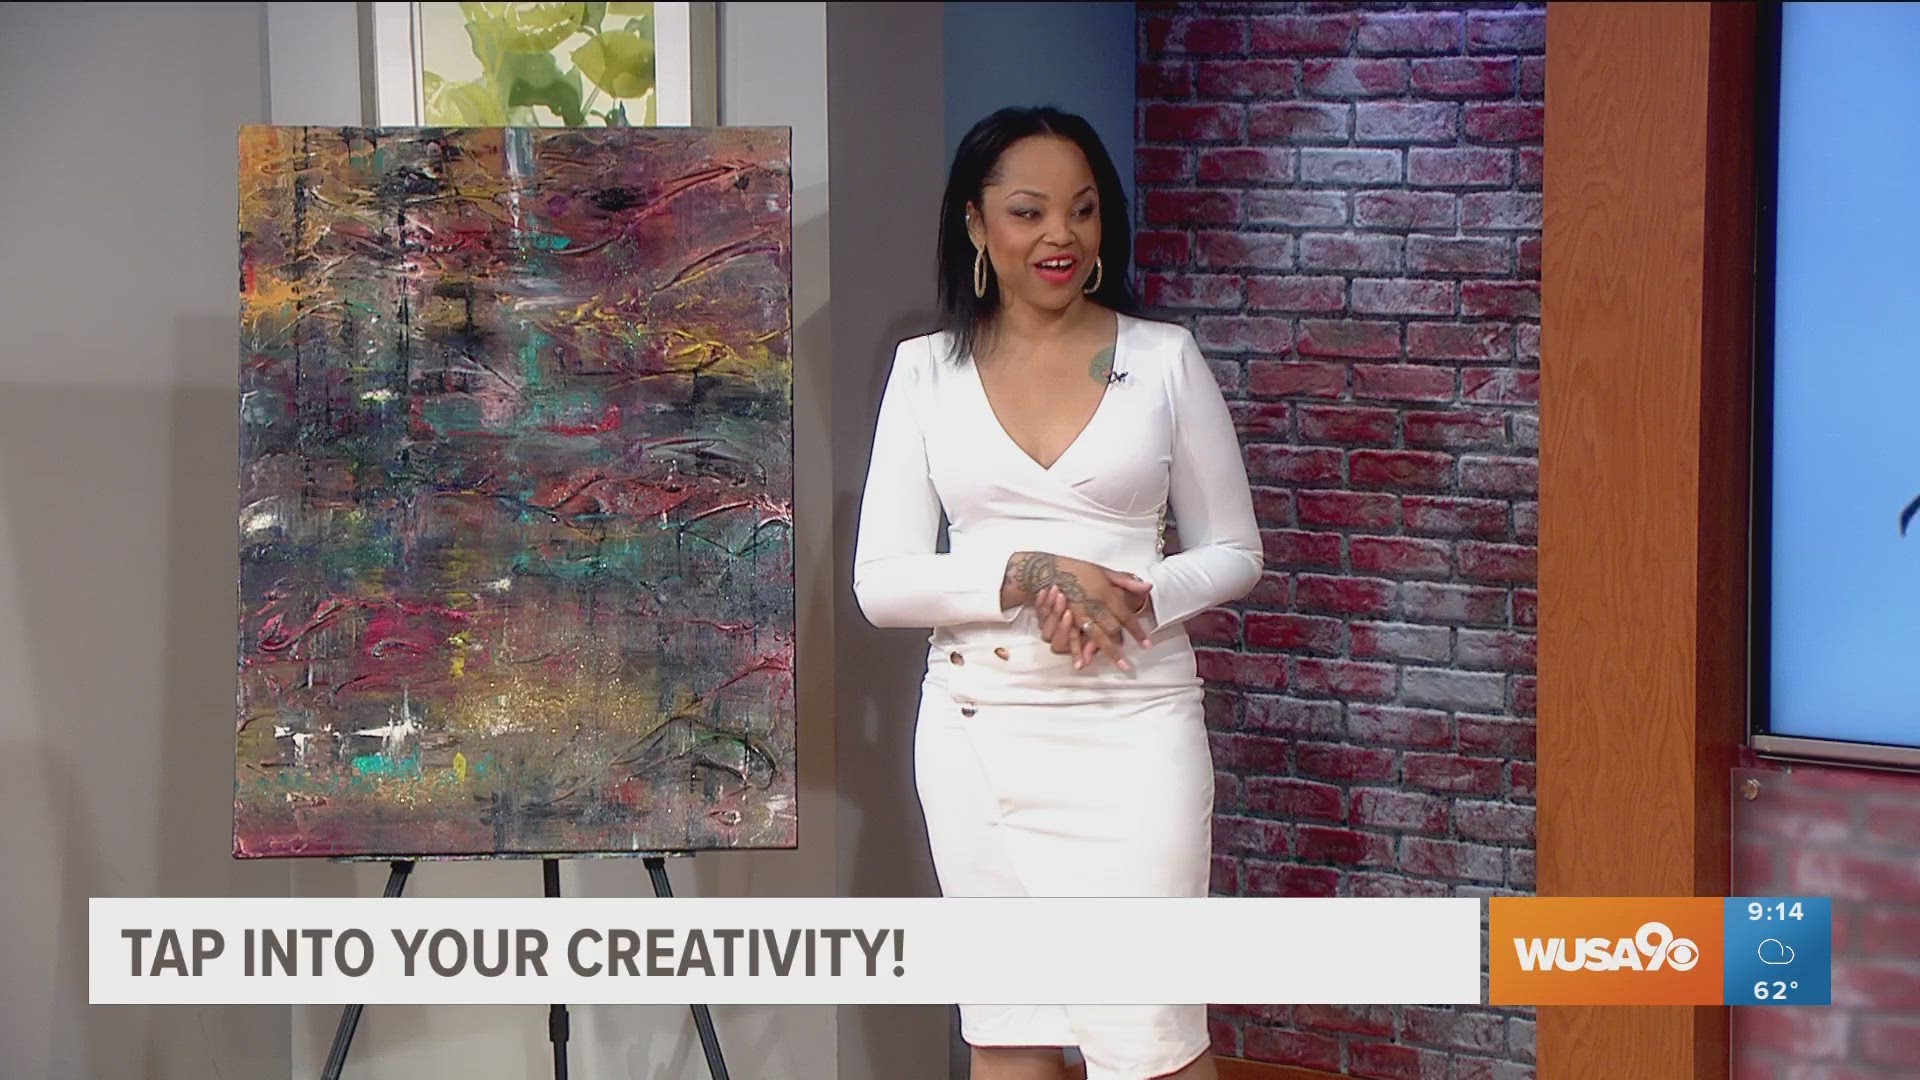 Get ready to tap into your creativity! DMV artist April Nicole shows how you can get started with supplies that you can find around the home. IG: @artby_aprilnicole.